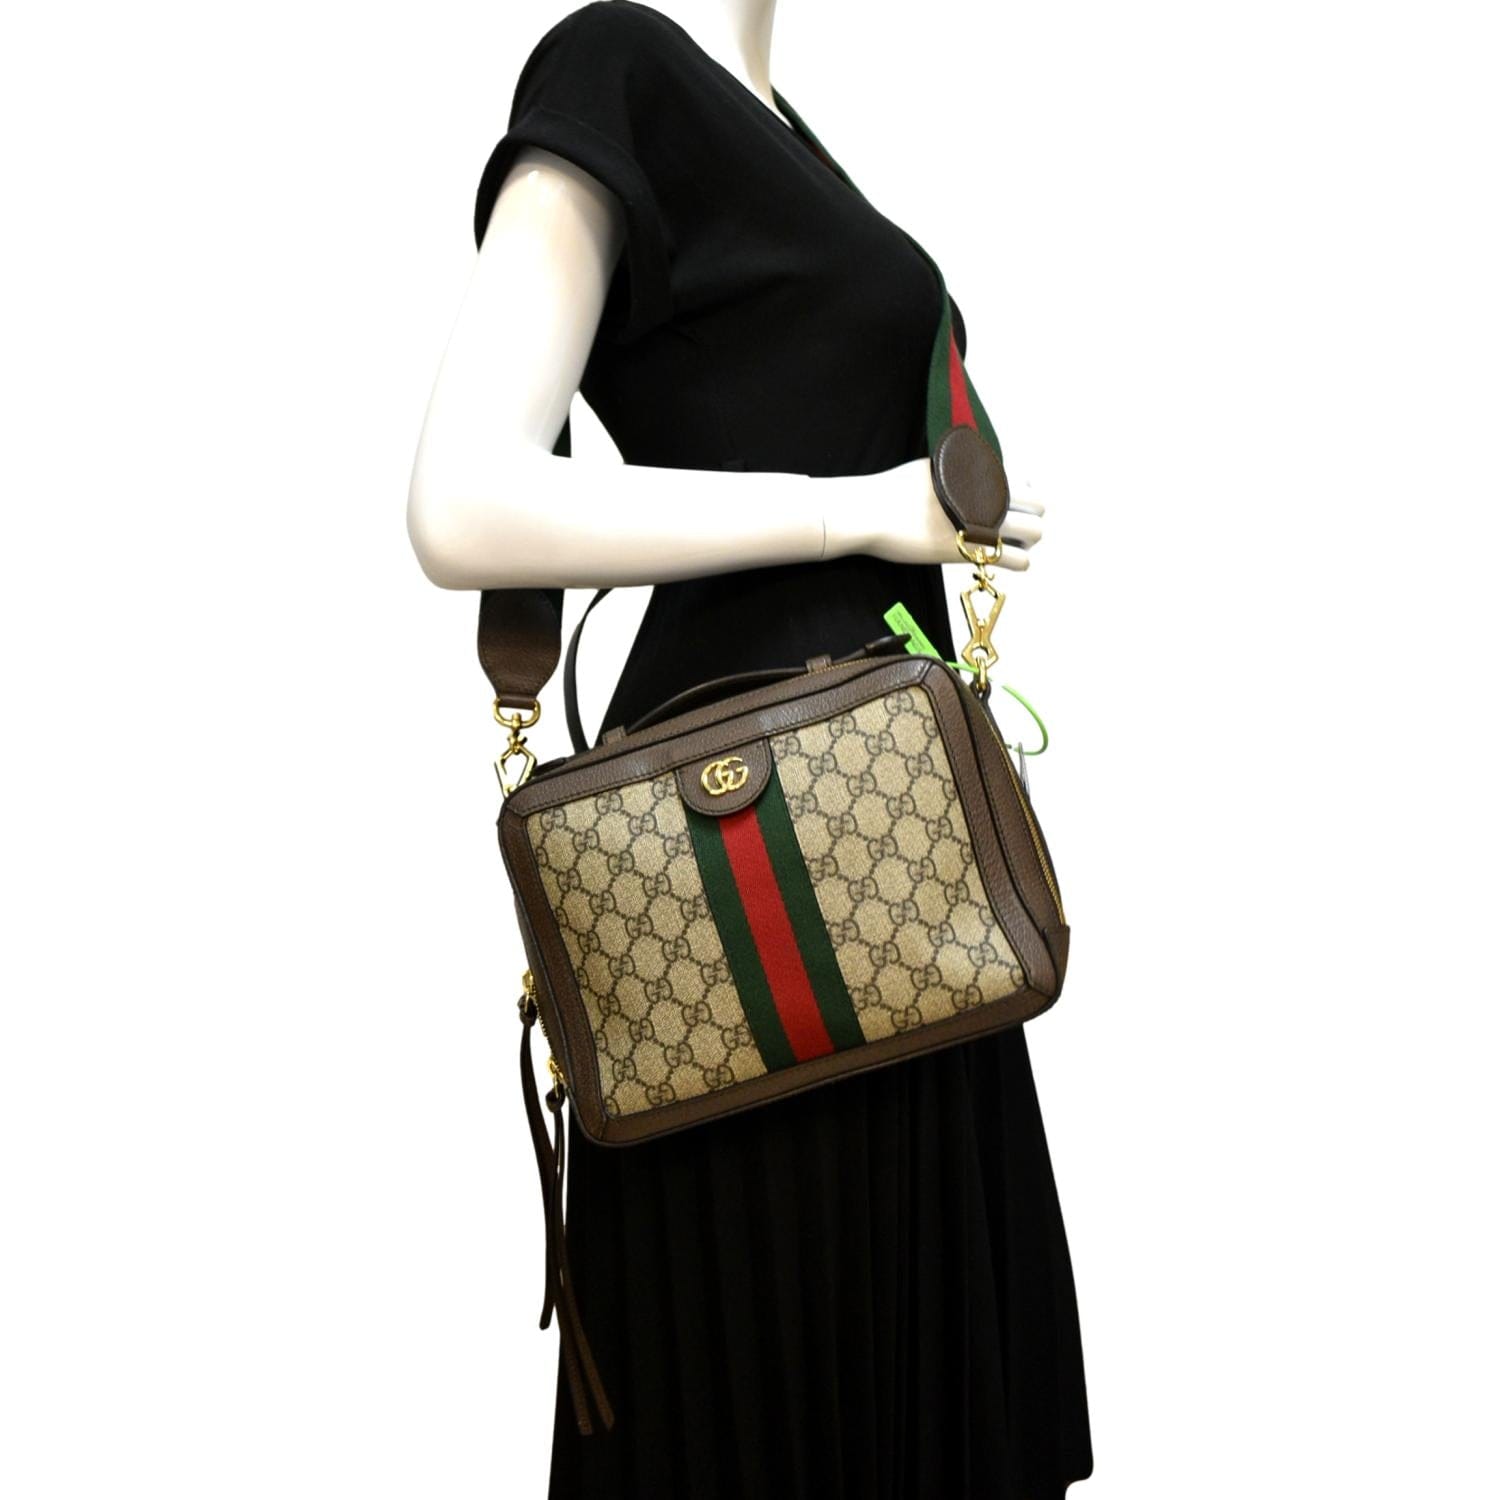 Gucci Beige Small Ophidia GG Shoulder Bag for Women